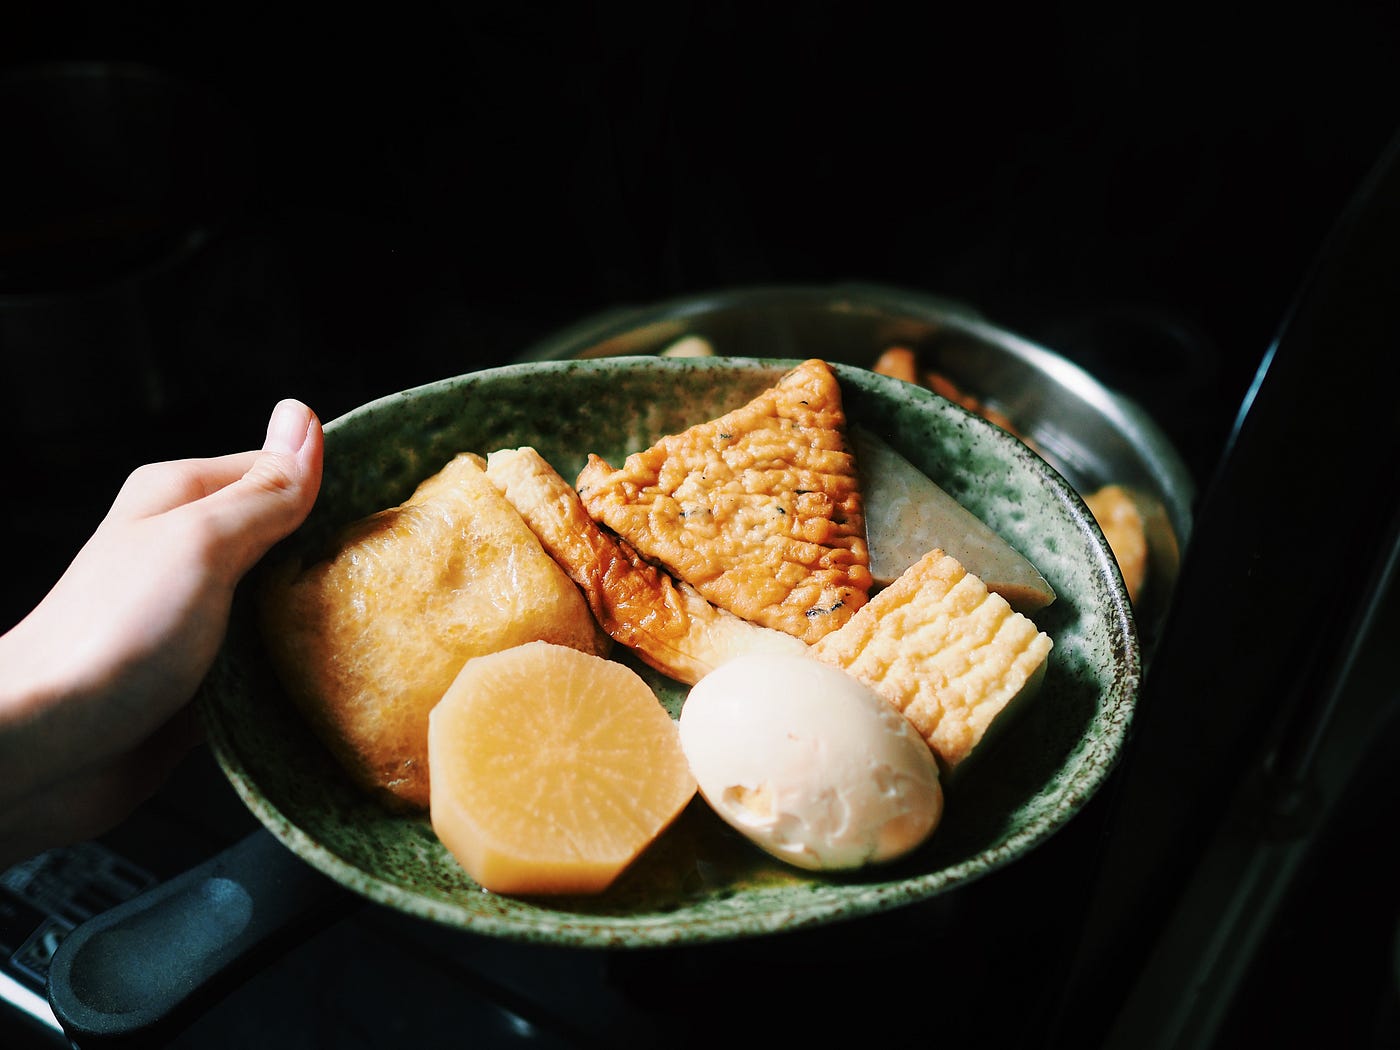 Japanese Cuisine, Hot Pot Oden For Winter Food Image Stock Photo